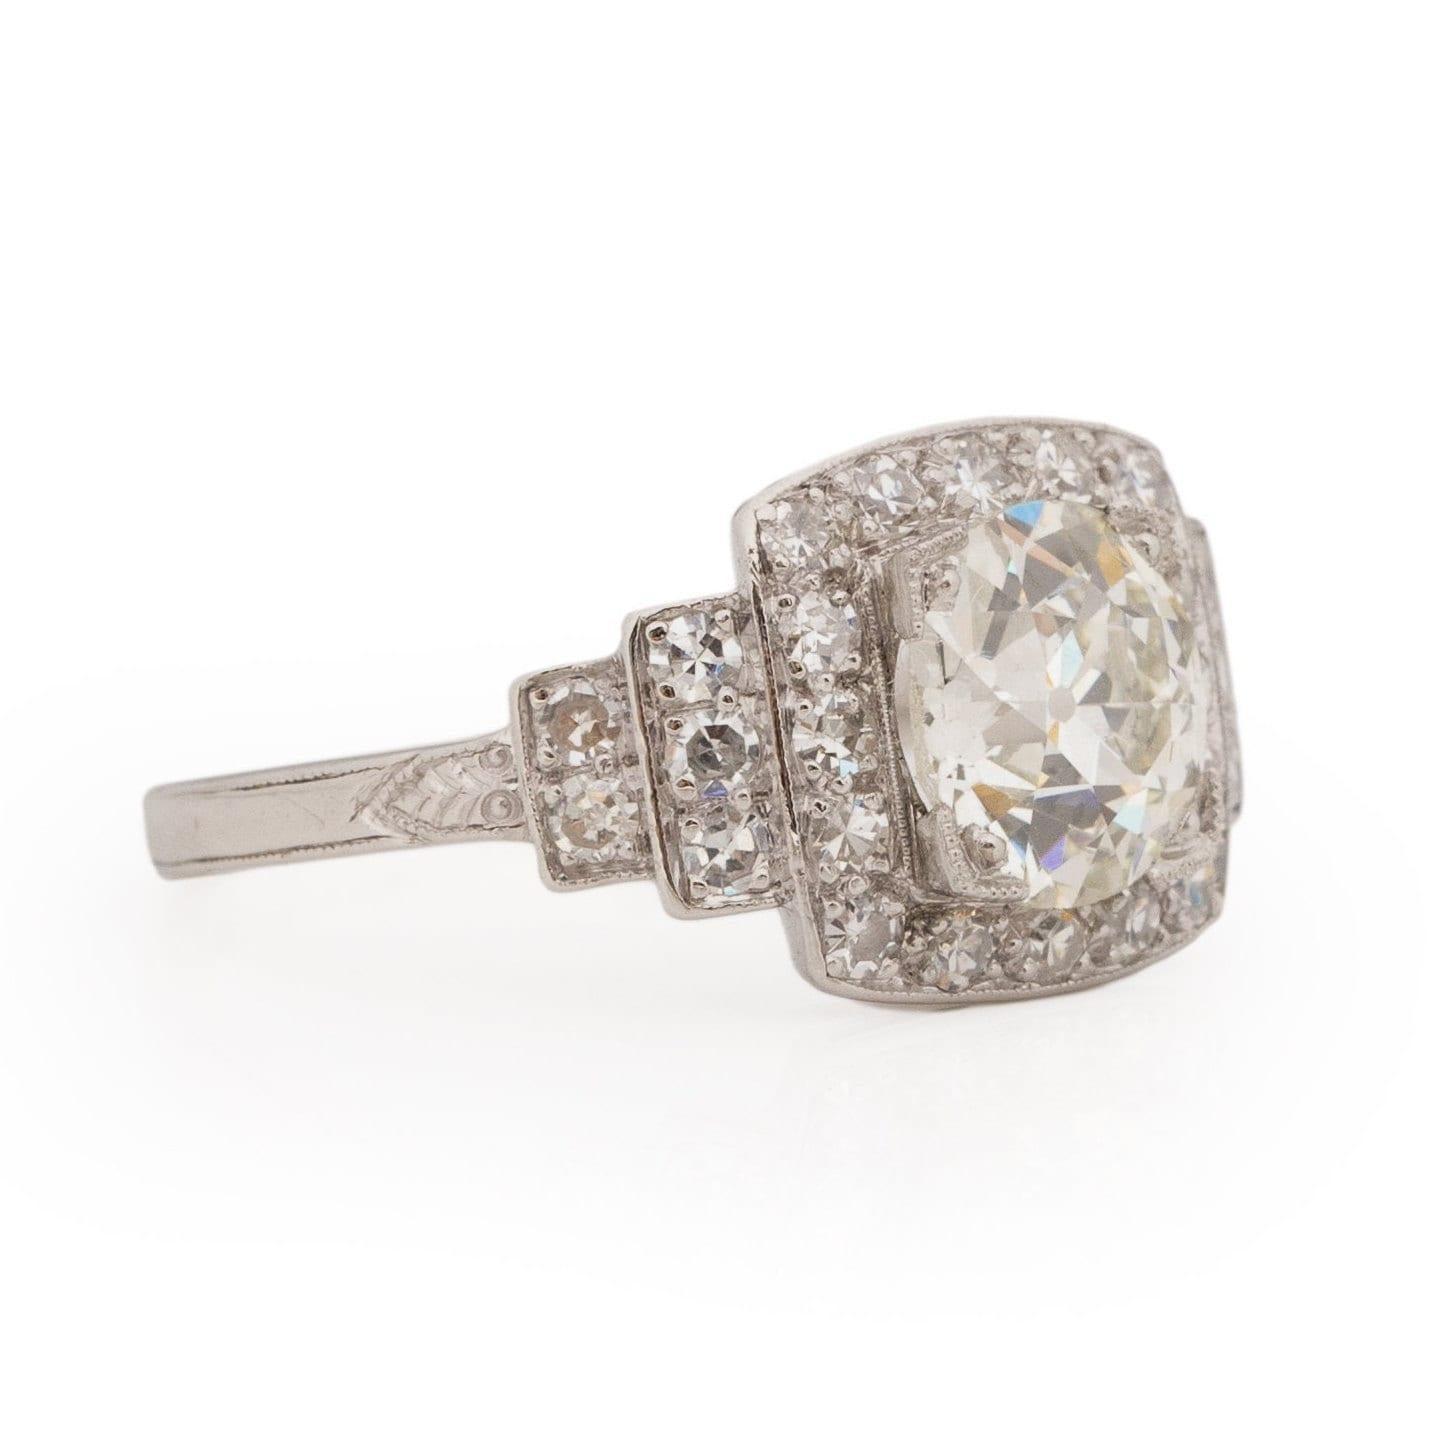 Circa 1920's Art Deco Platinum 1.58Ct GIA Certified Old European Cut Square Halo In Good Condition For Sale In Addison, TX